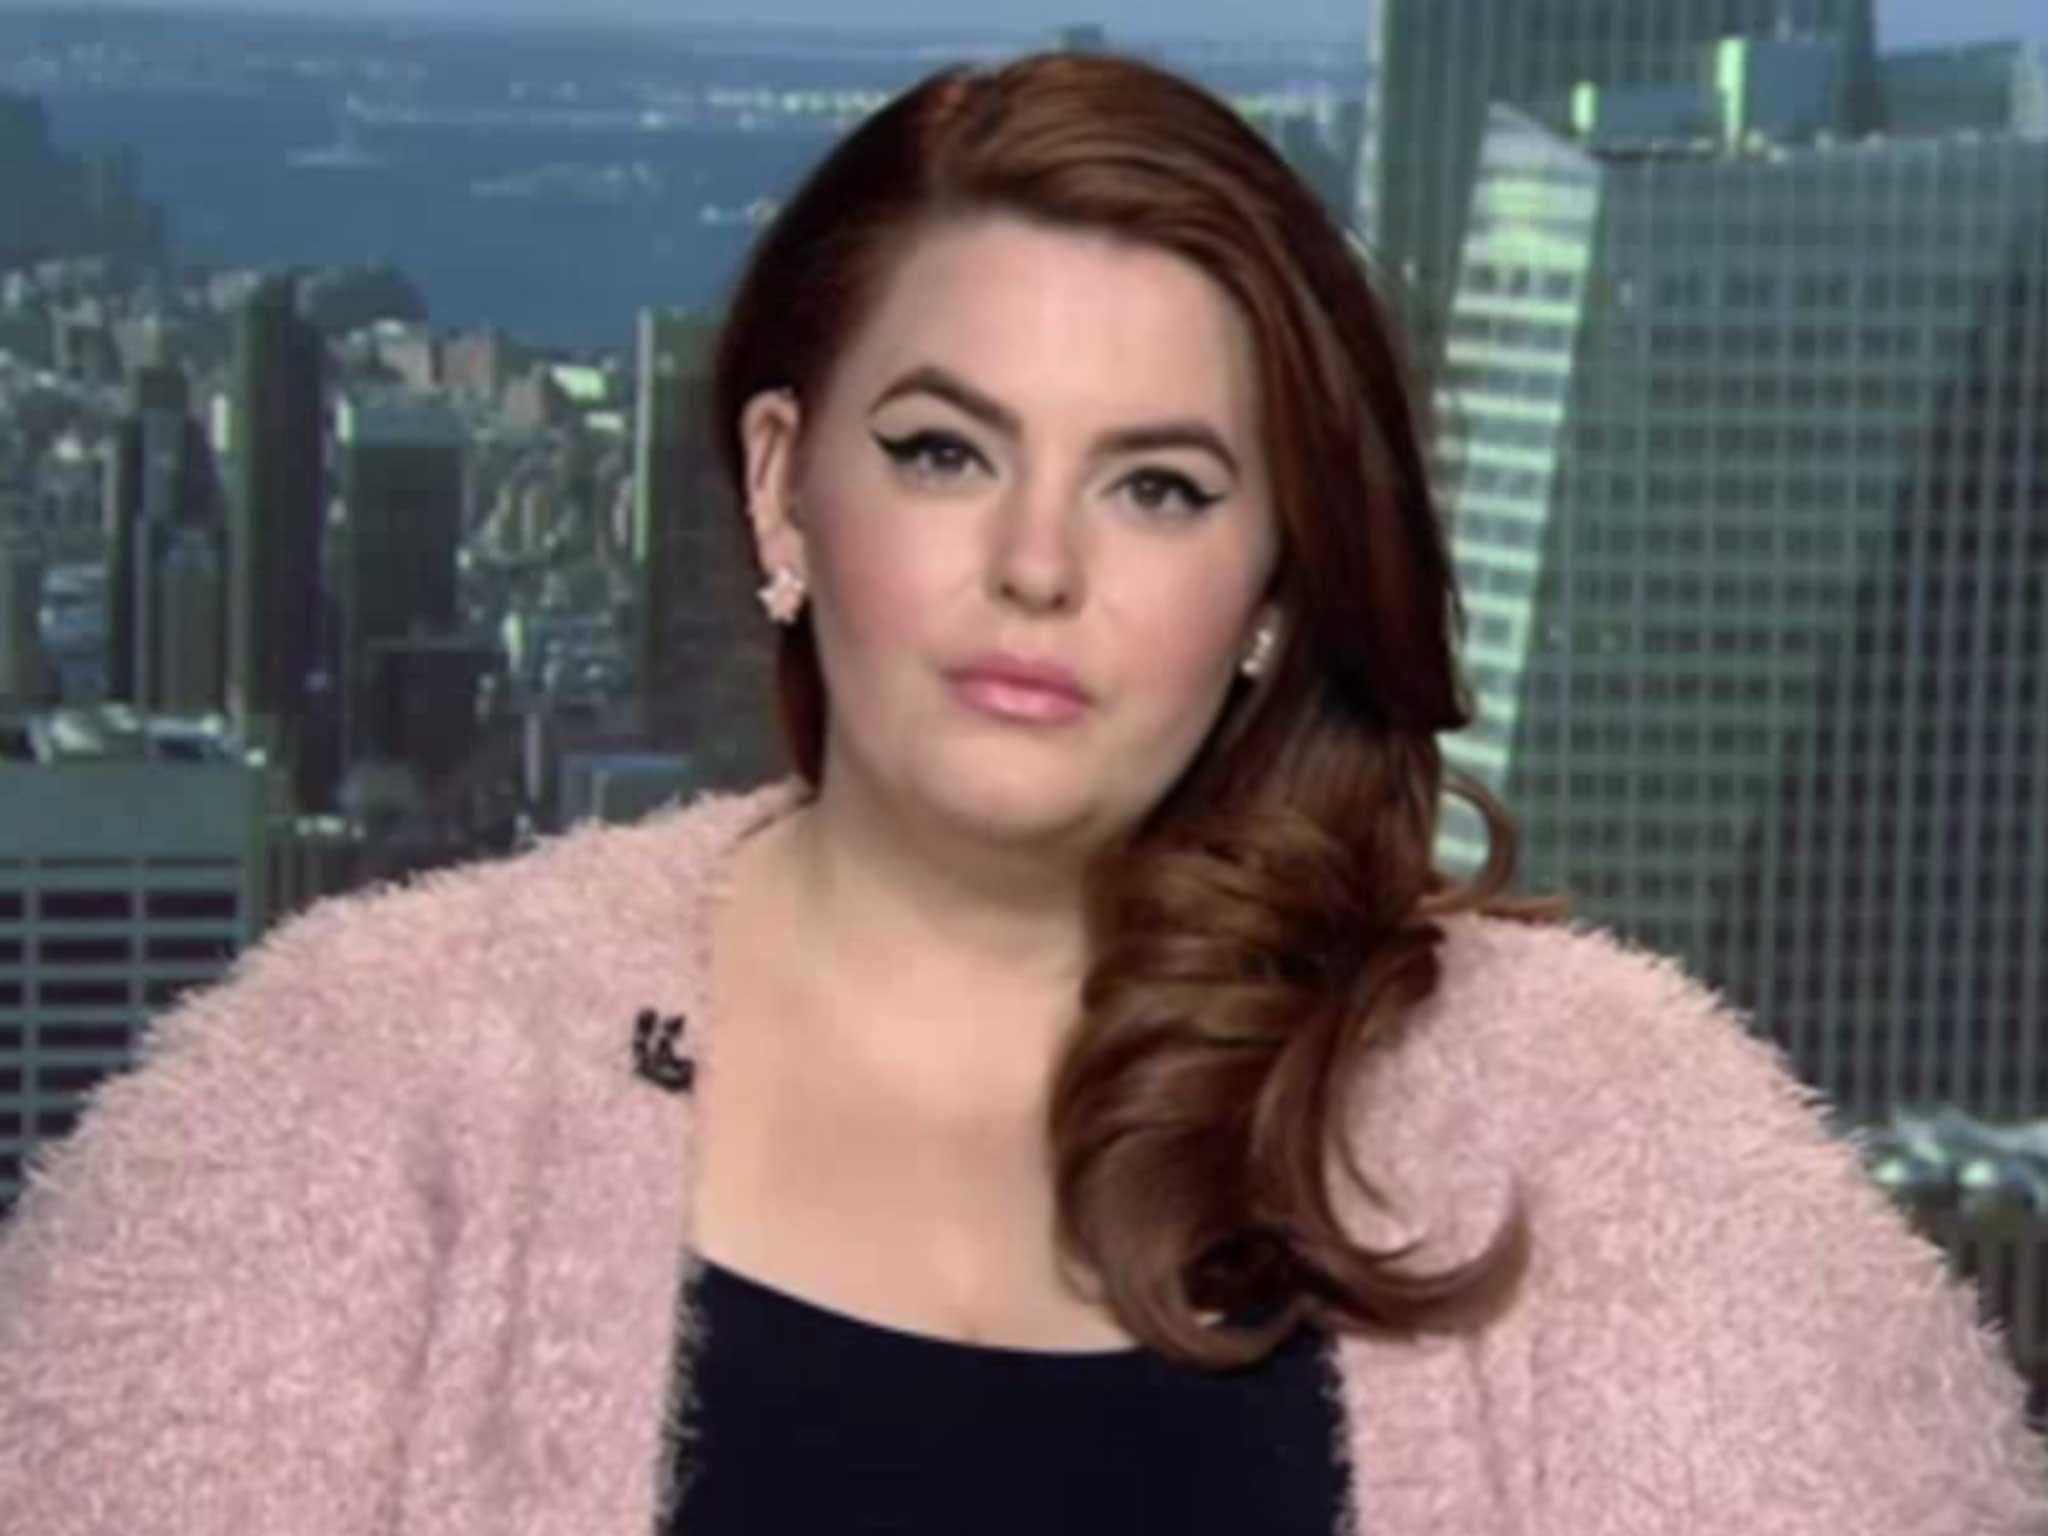 Tess Holliday has been targeted by Project Harpoon